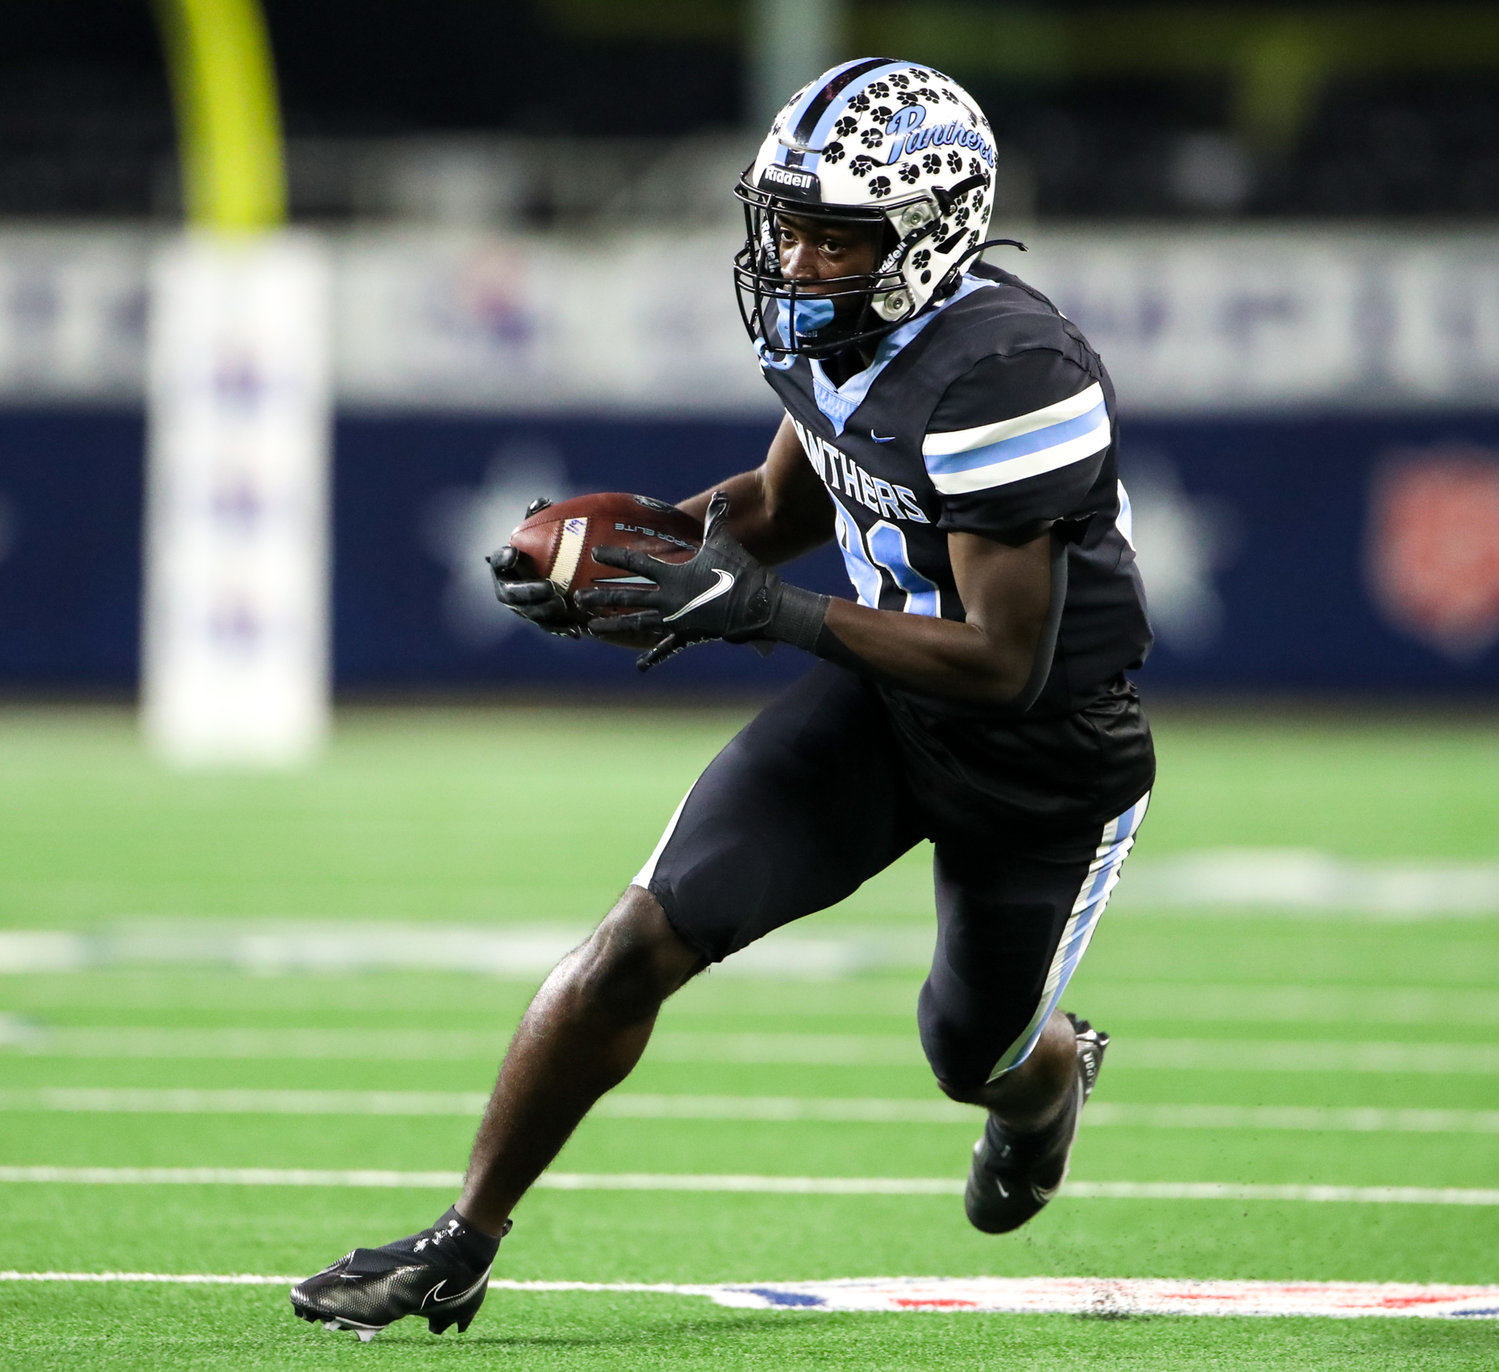 Paetow Panthers wide receiver Brandon Shanks (81) carries the ball during the Class 5A-Division I state championship game Paetow and College Station on December 17, 2021 in Arlington, Texas.